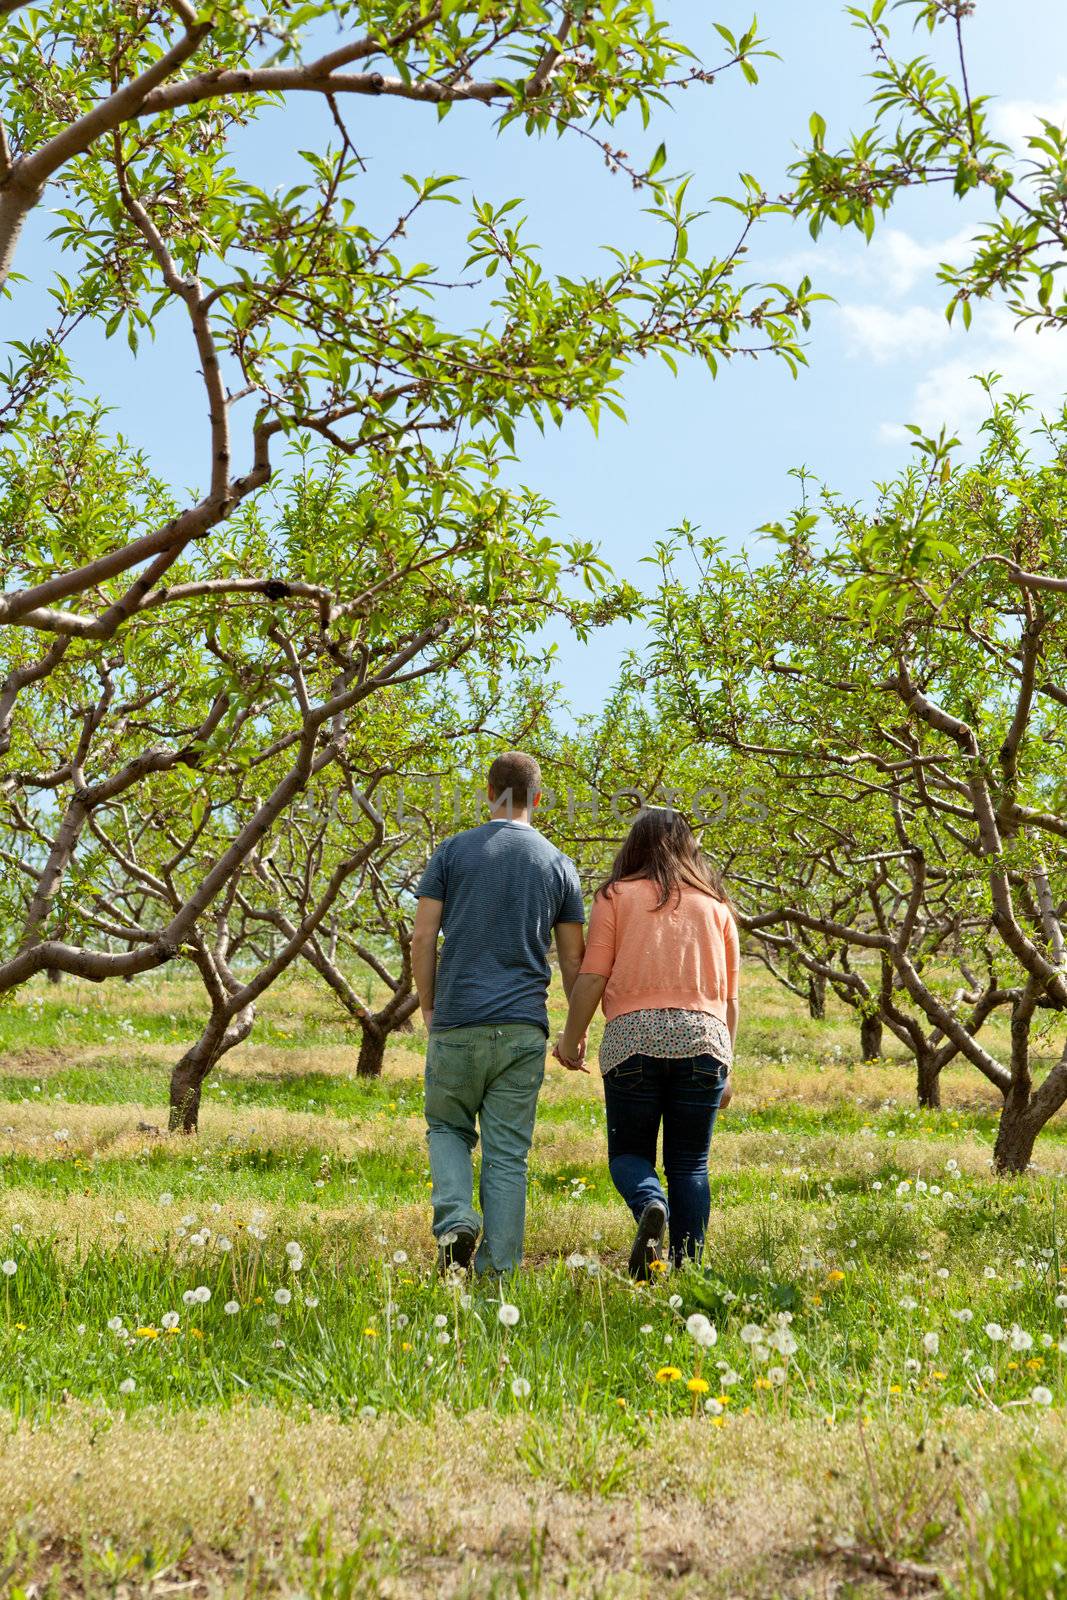 Young happy couple enjoying each others company outdoors through a country apple orchard.